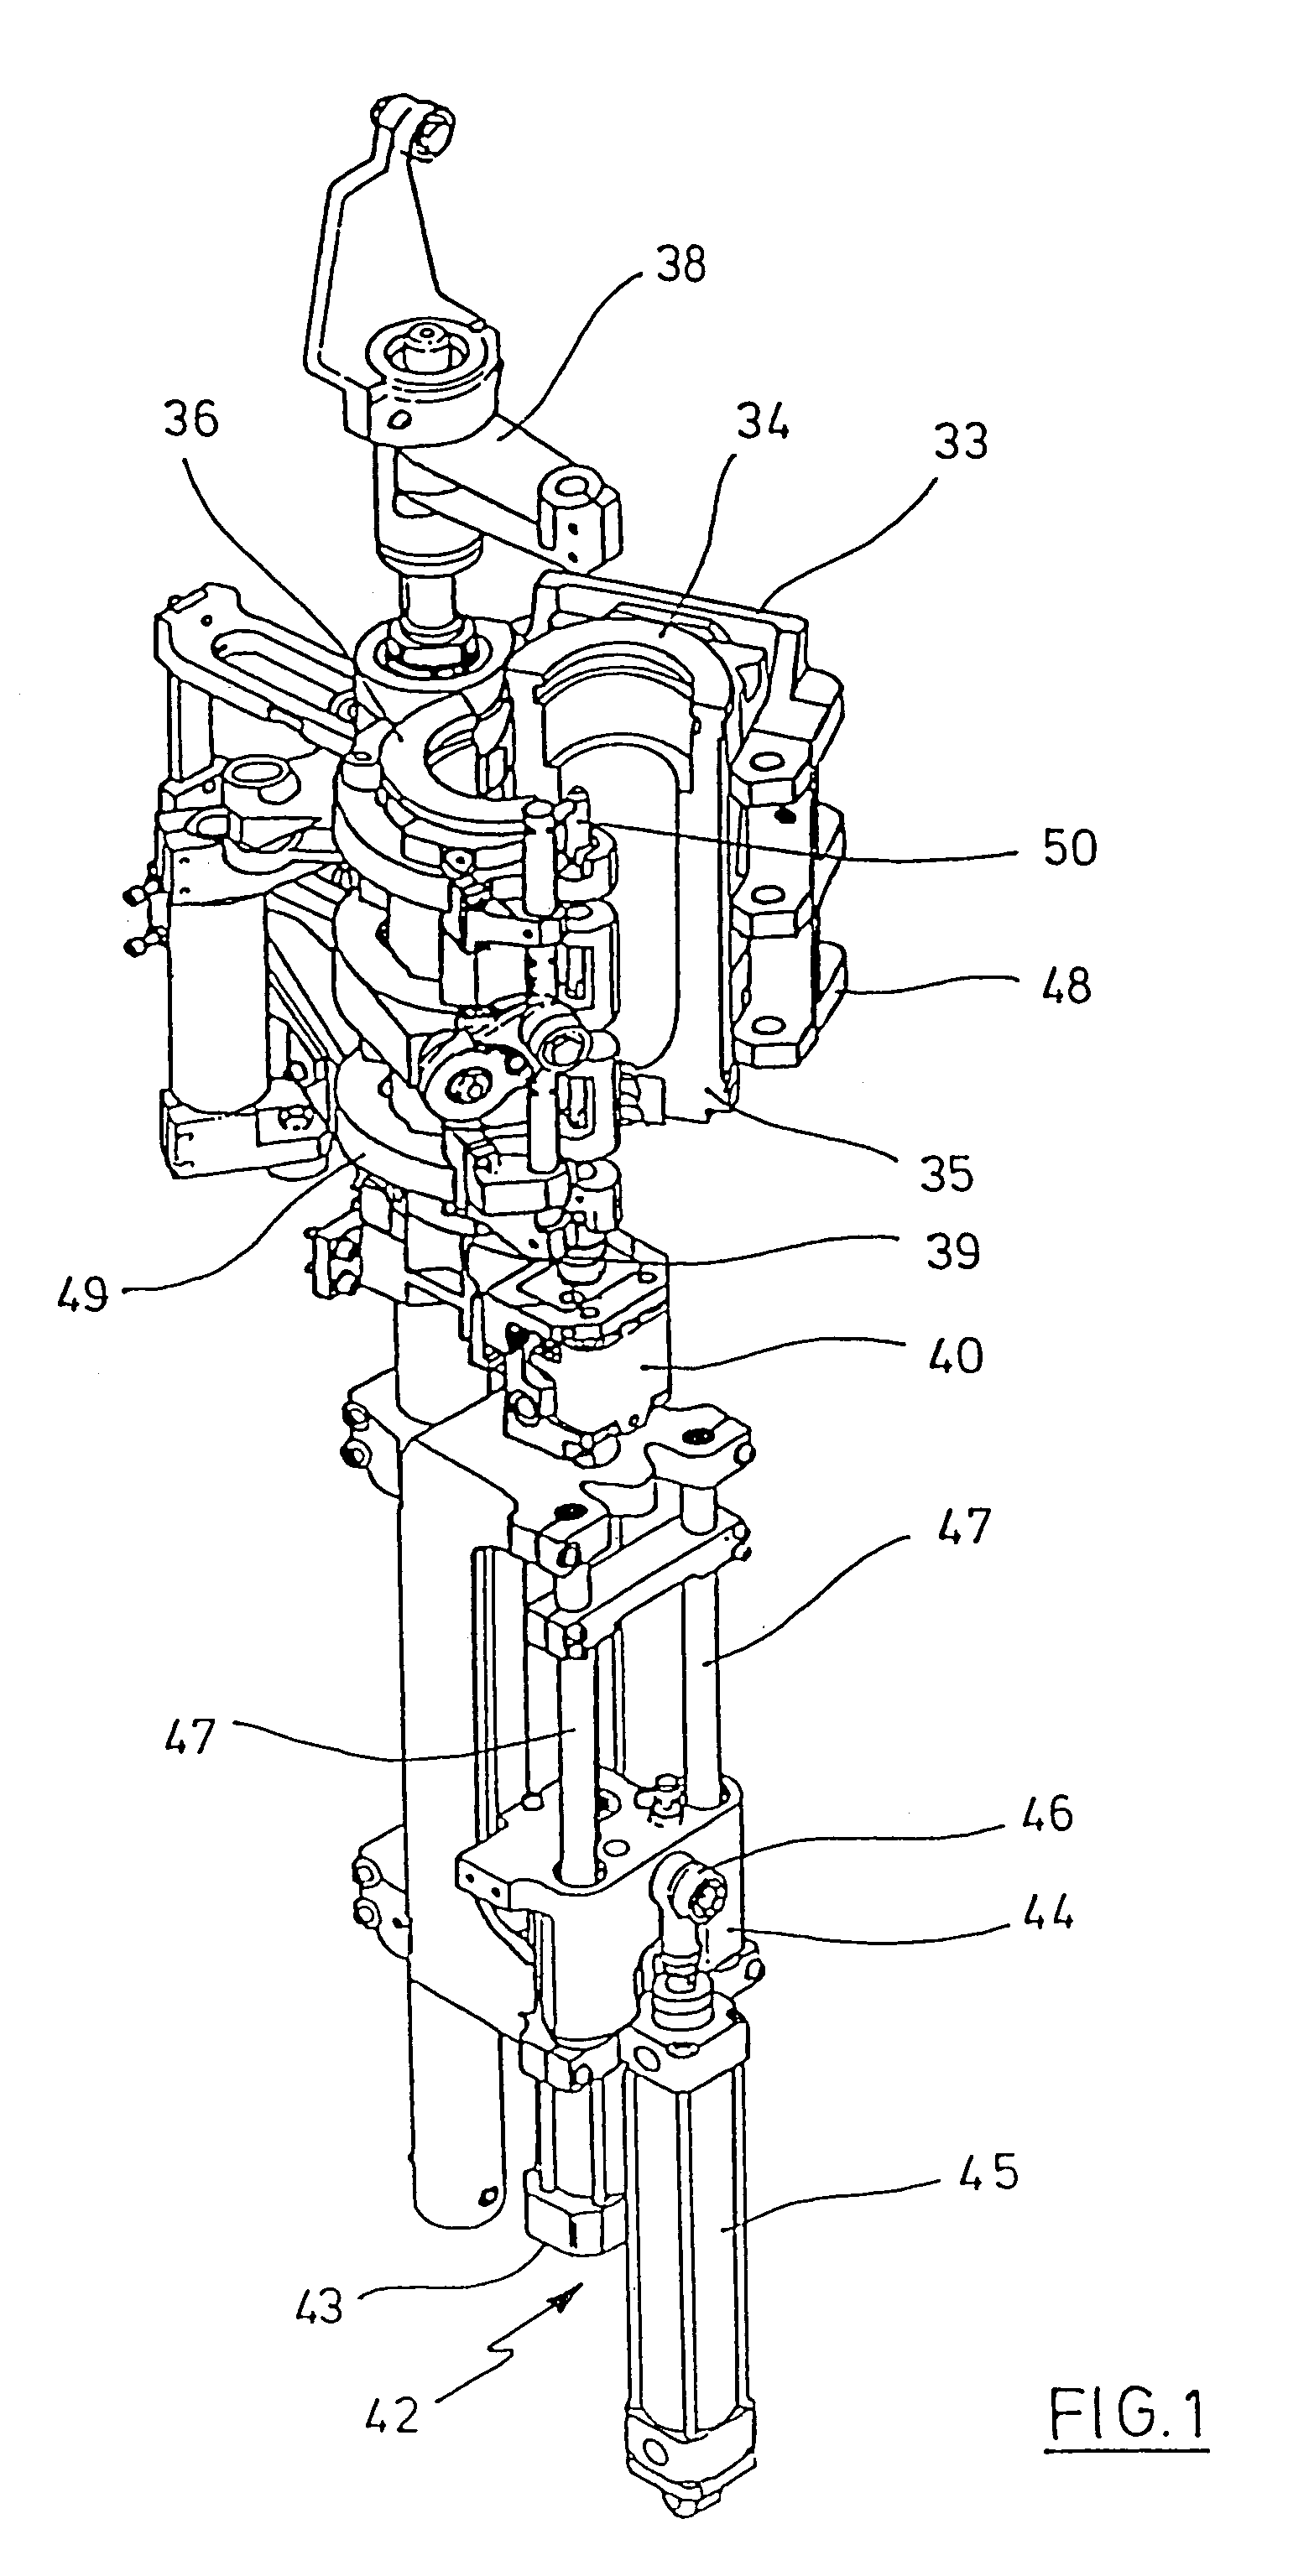 Device for blow-molding containers